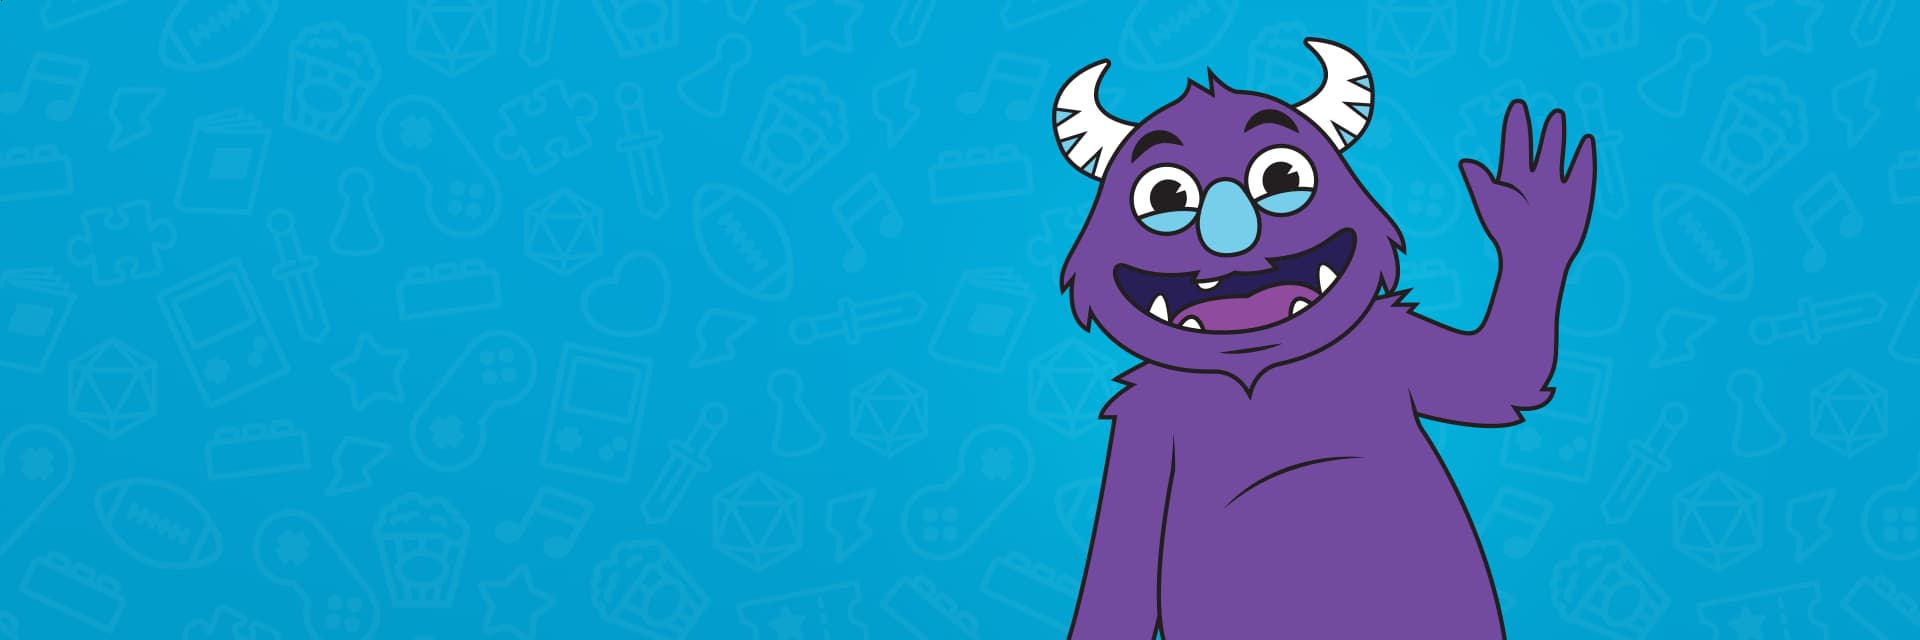 The FUN.com monster set against a blue background featuring various pop culture related icons